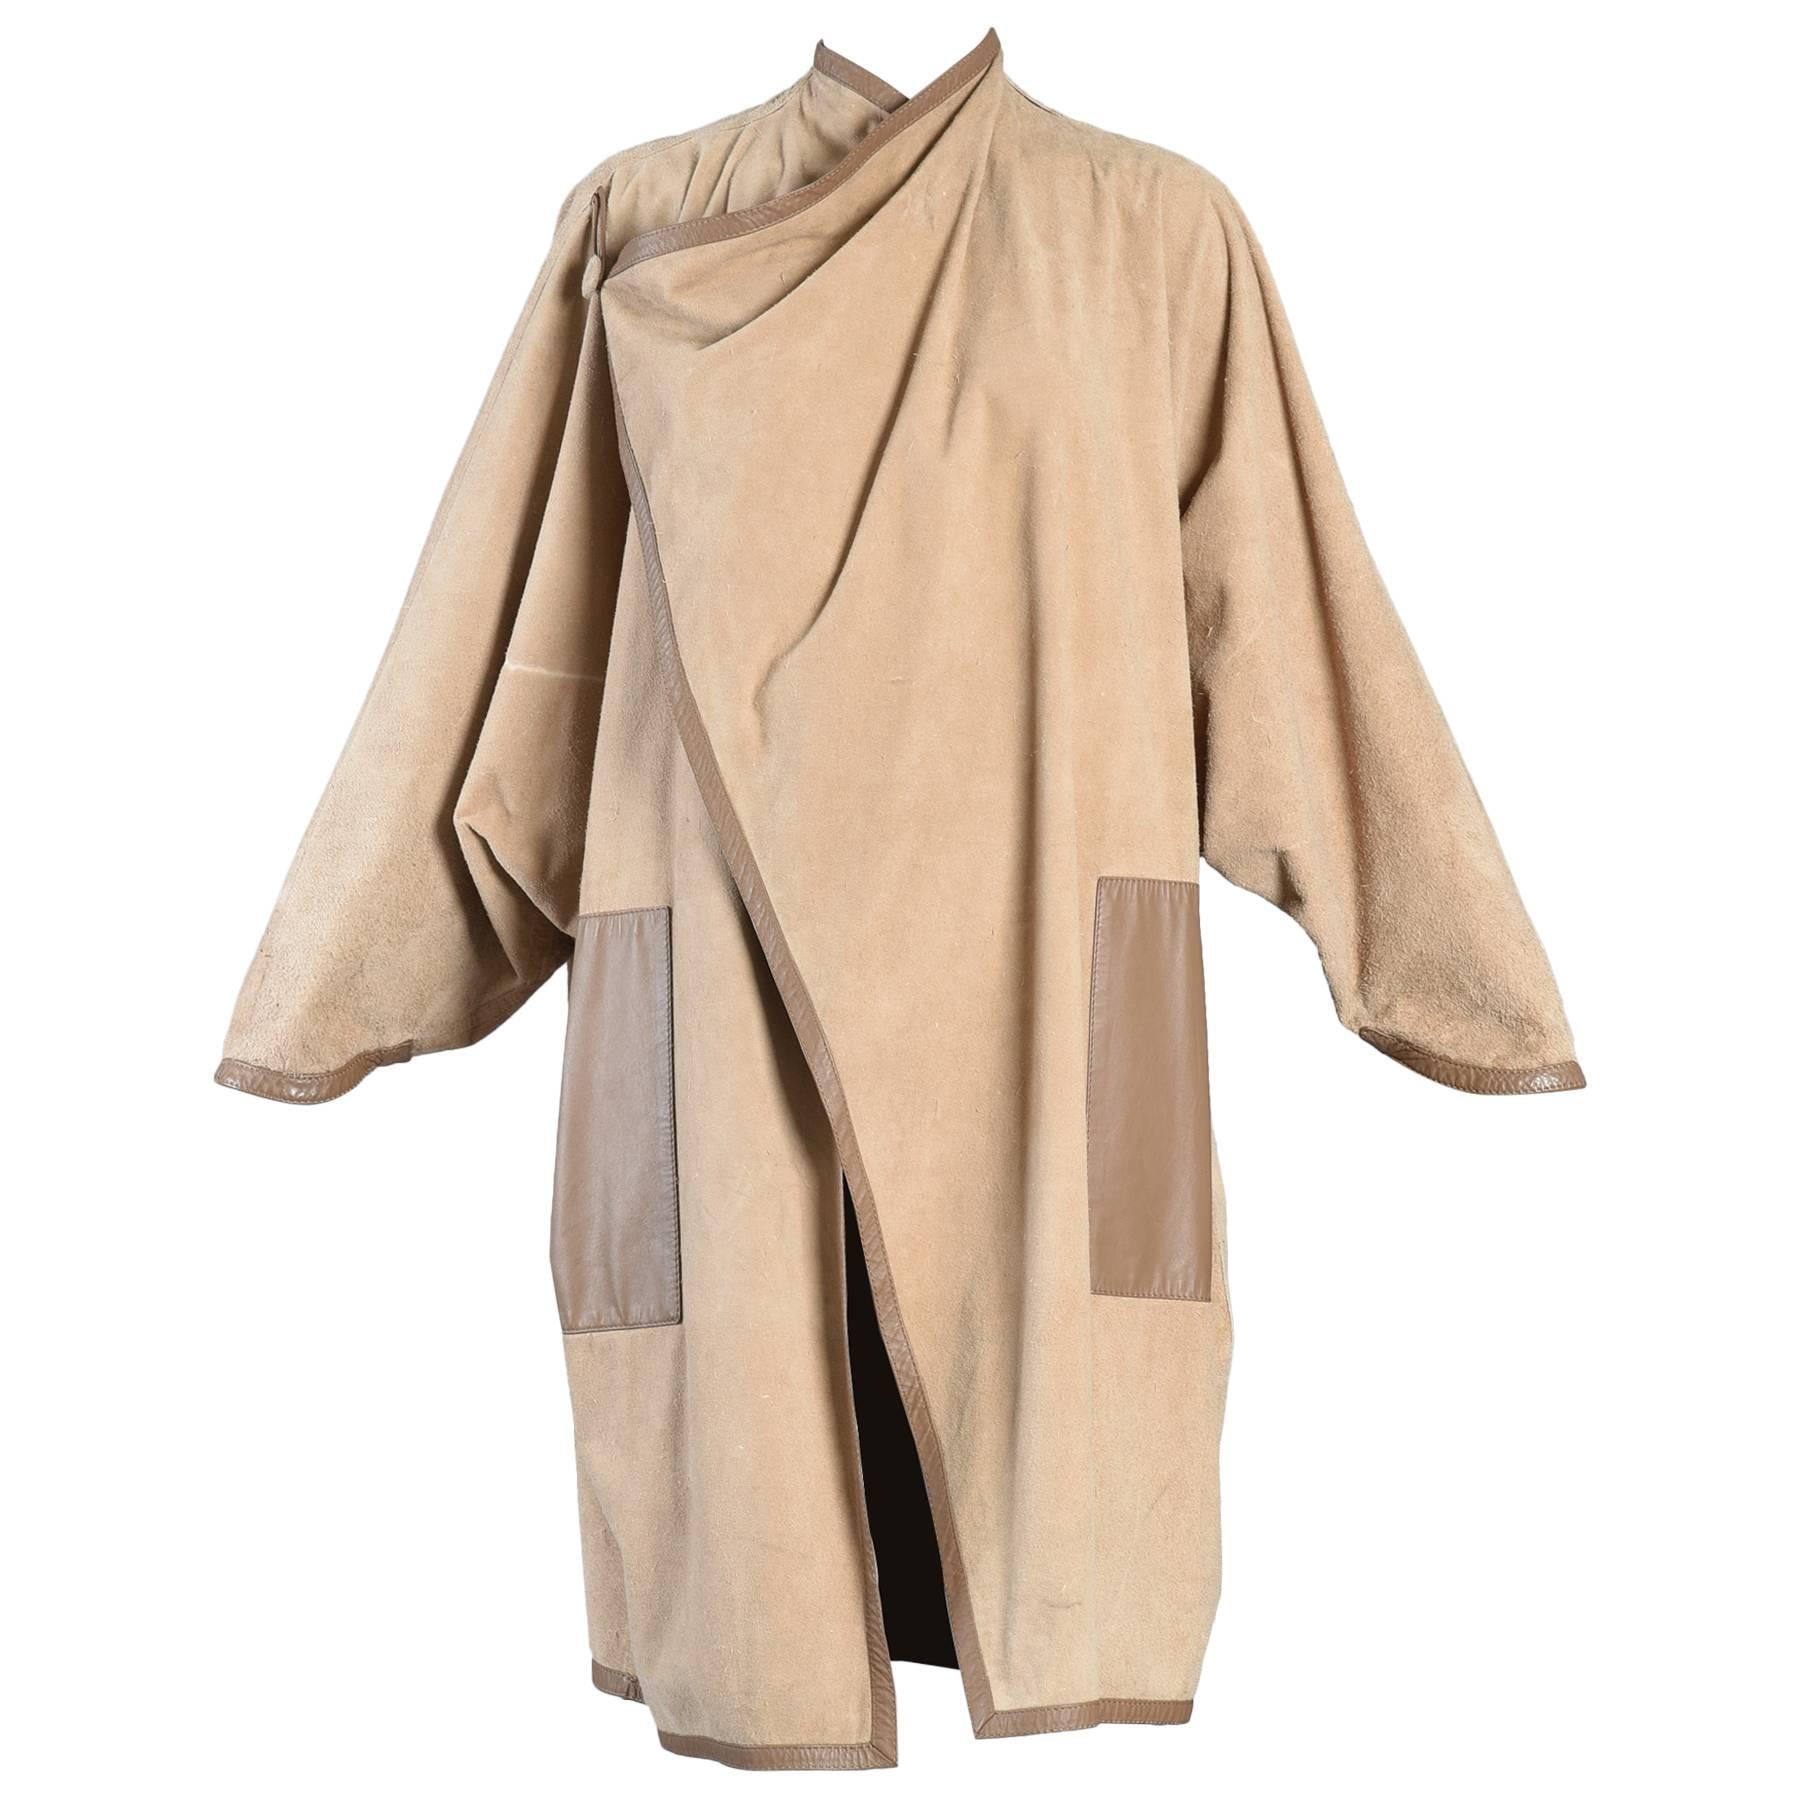 Incredible 1980s Reversible Suede Leather Avant Garde Draped Cape For Sale